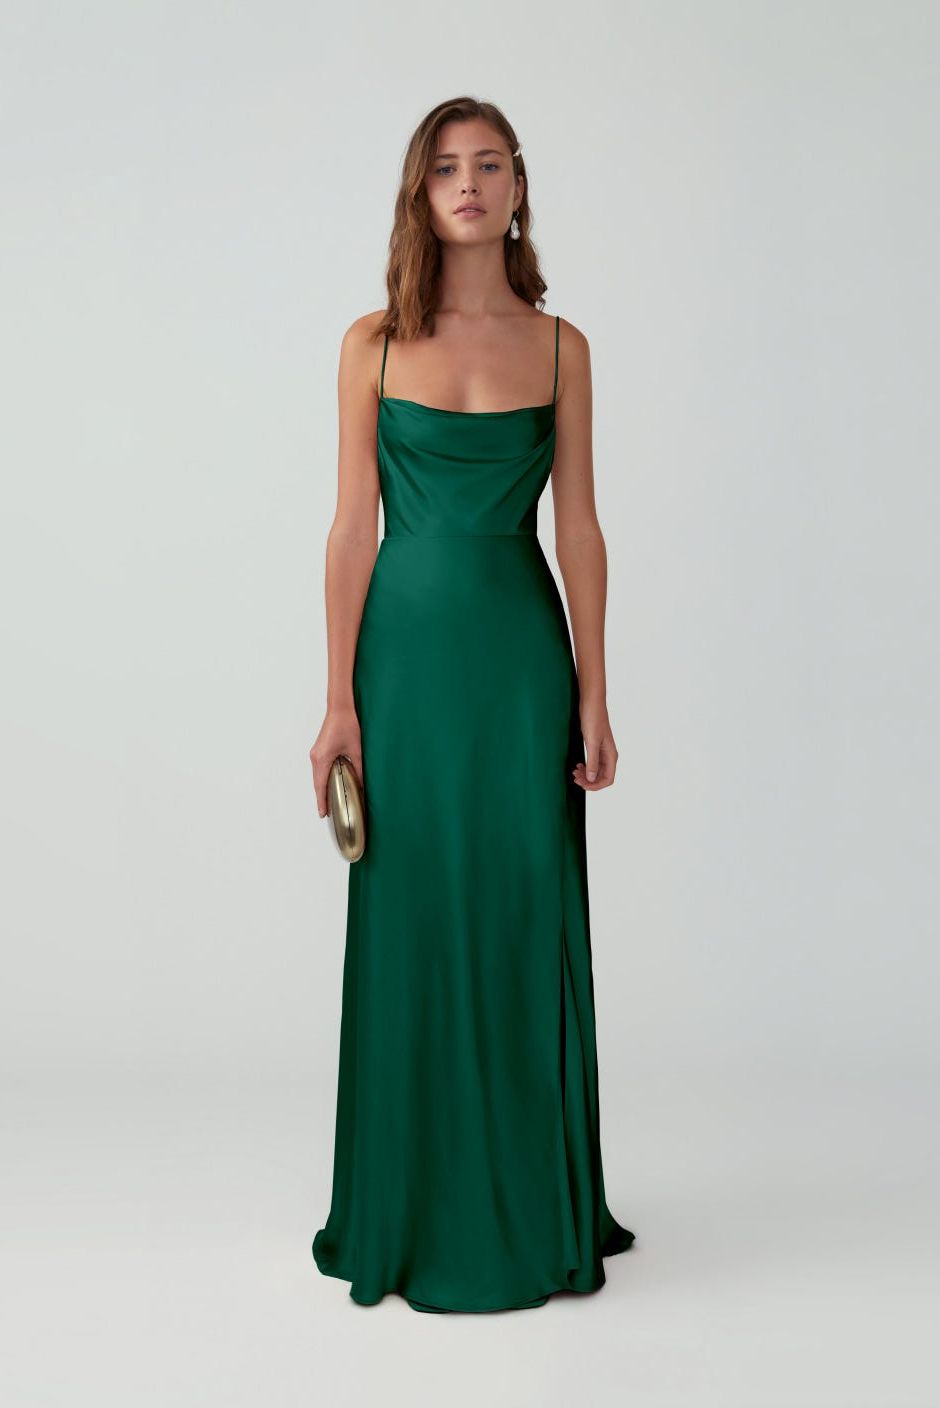 The Weekly Covet: Wardrobe Staples for Every Gala, Soiree, and Formal ...